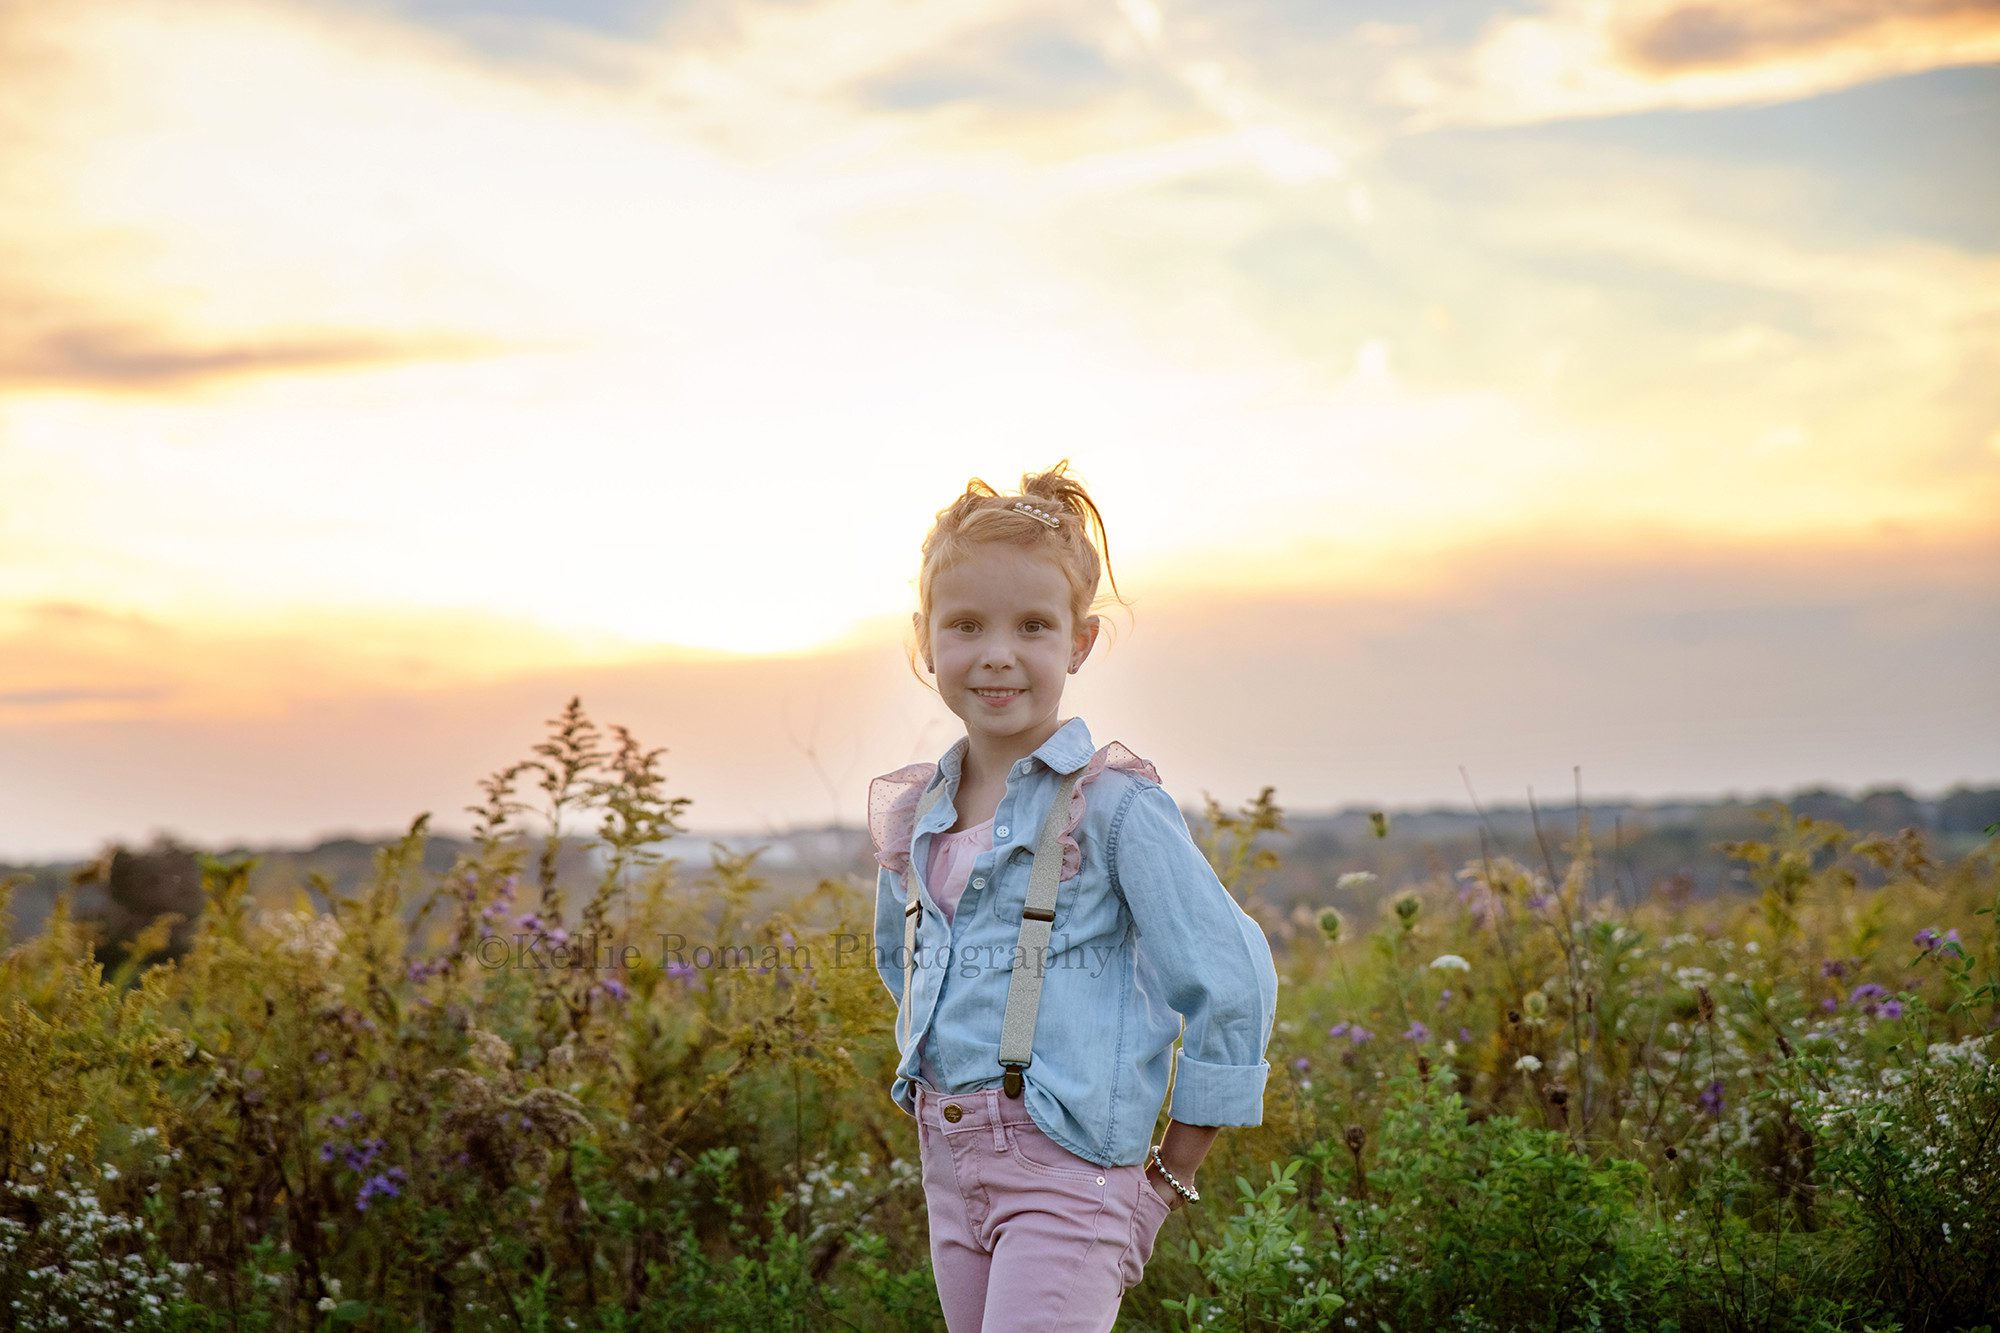 sunset milestone a young girl with red hair is standing in a field of tall grass in milwaukee Wisconsin park she is looking into the camera and smiling the sun is setting behind her on the horizon she has a denim blue shirt with pink and gold suspenders